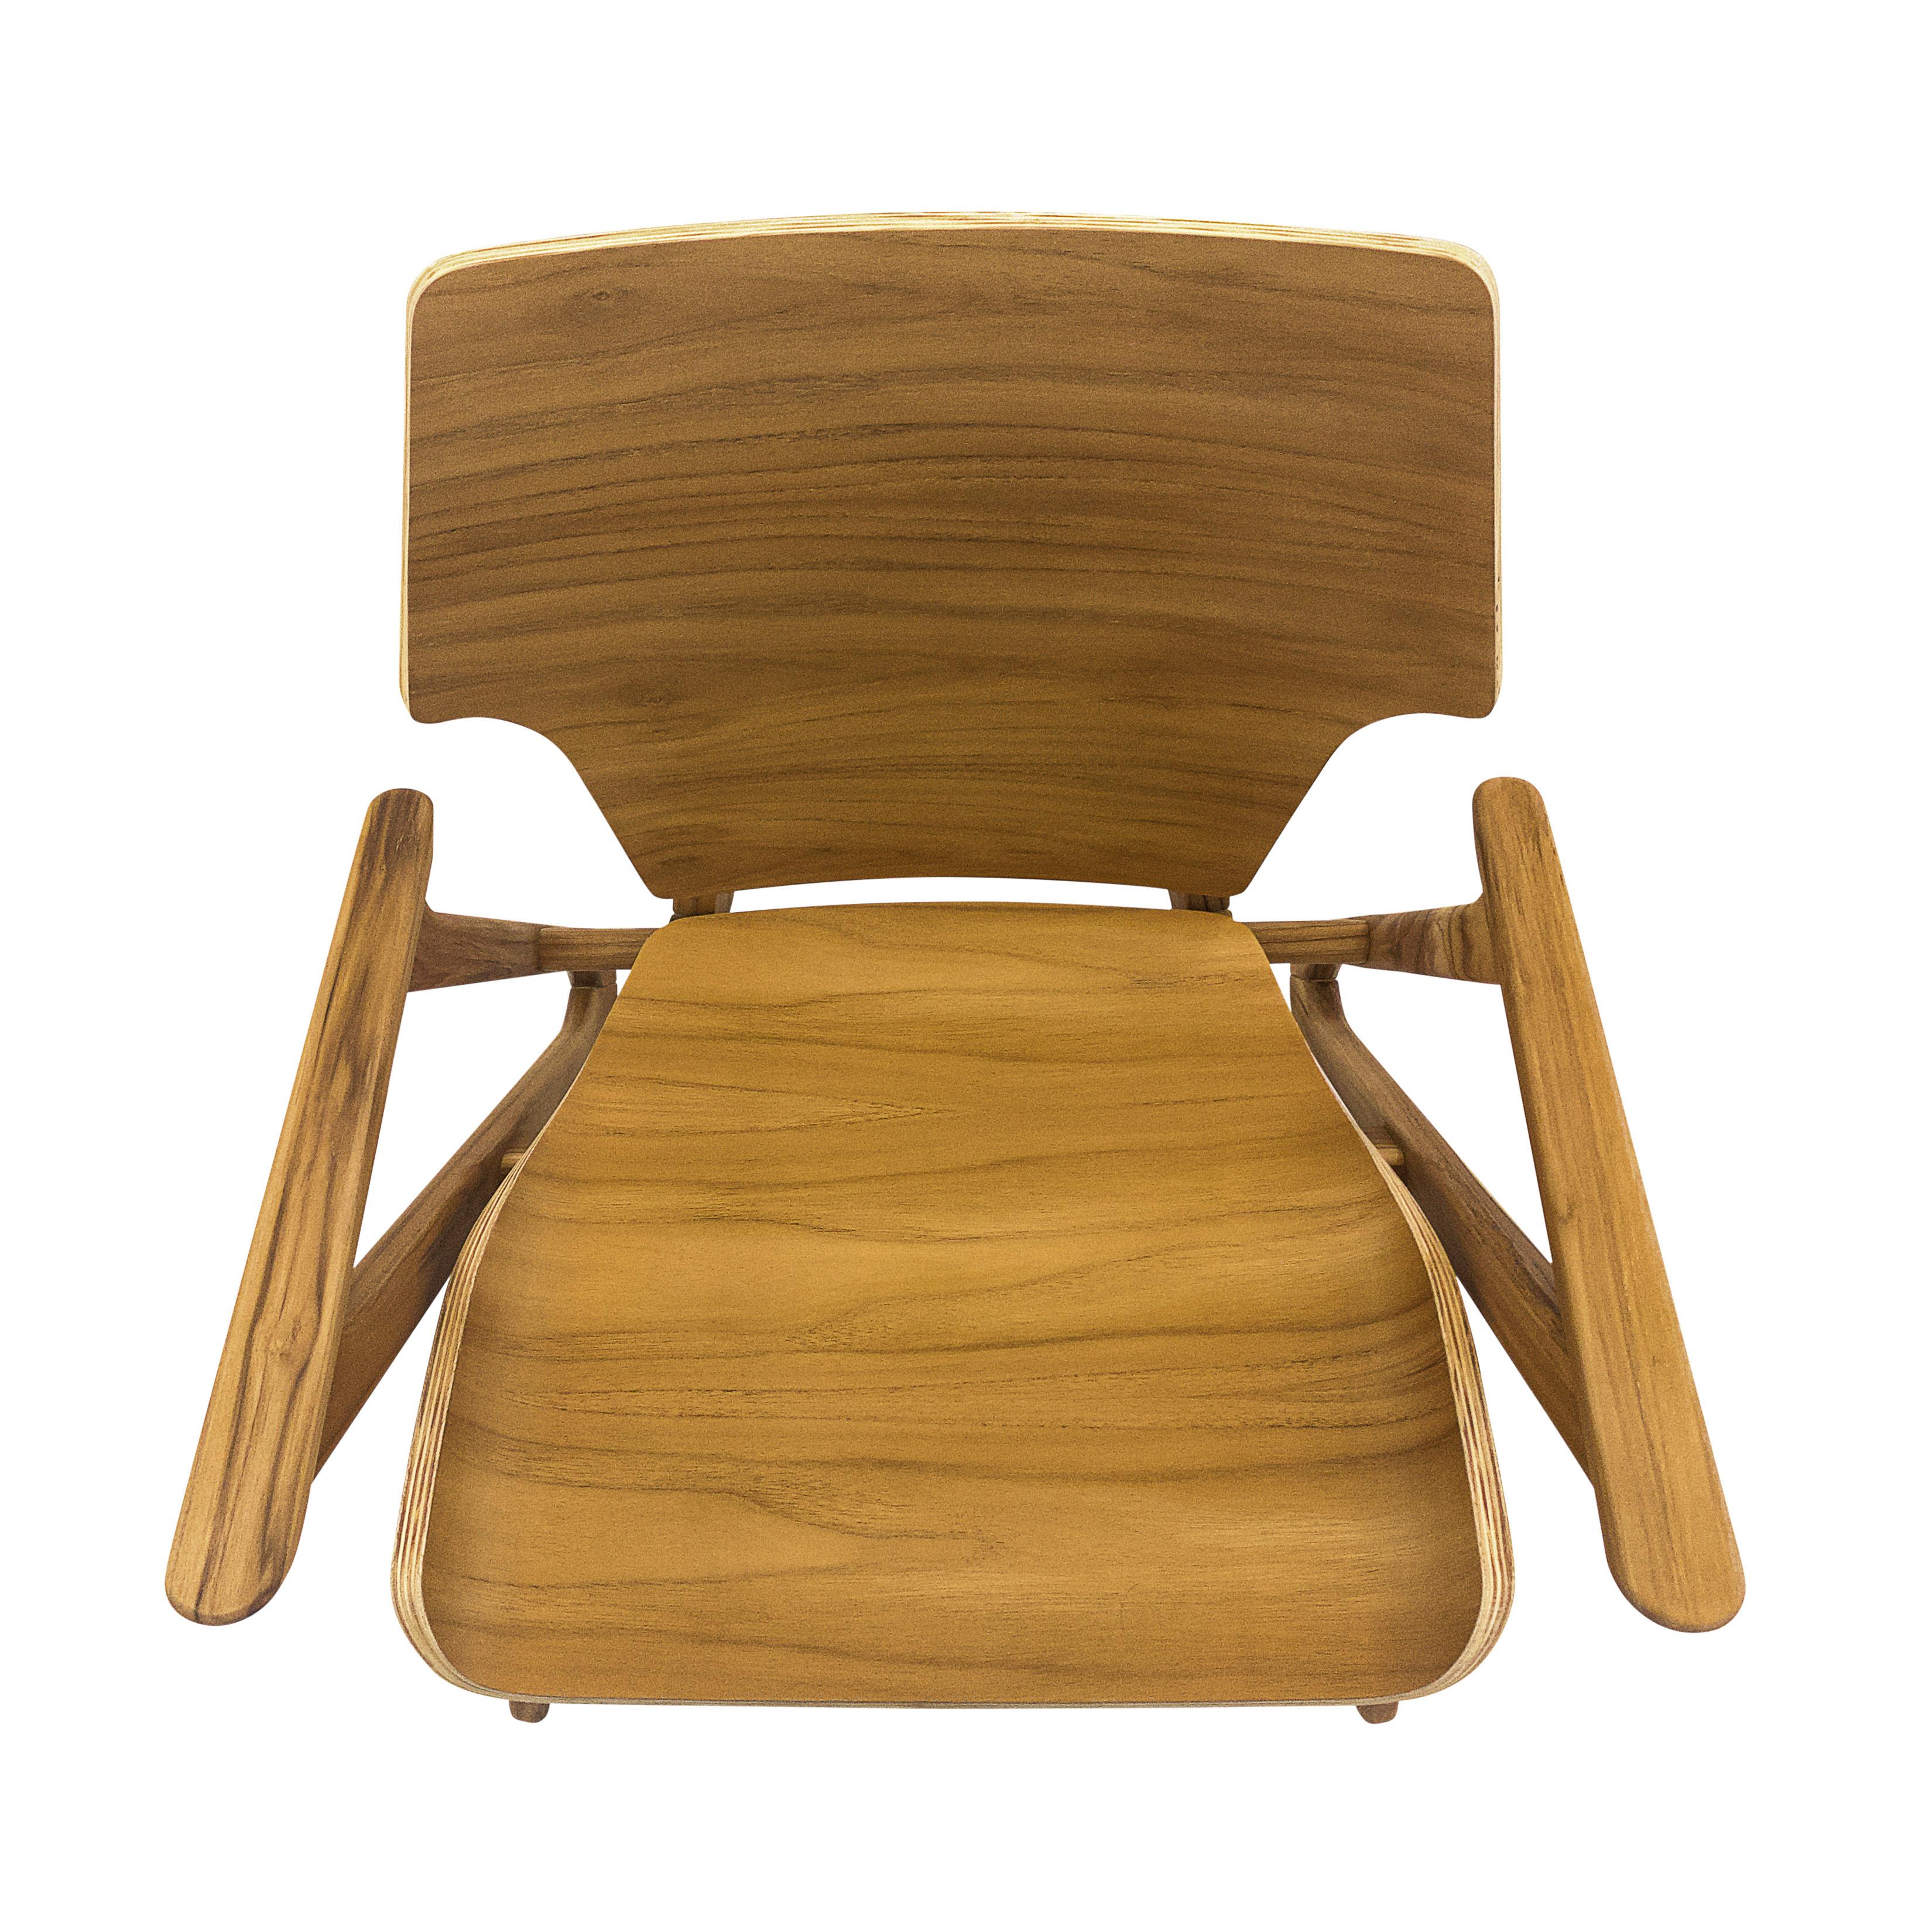 Velo Armchair with Shaped Seat and Shaped Back in Teak Wood Finish For Sale 2